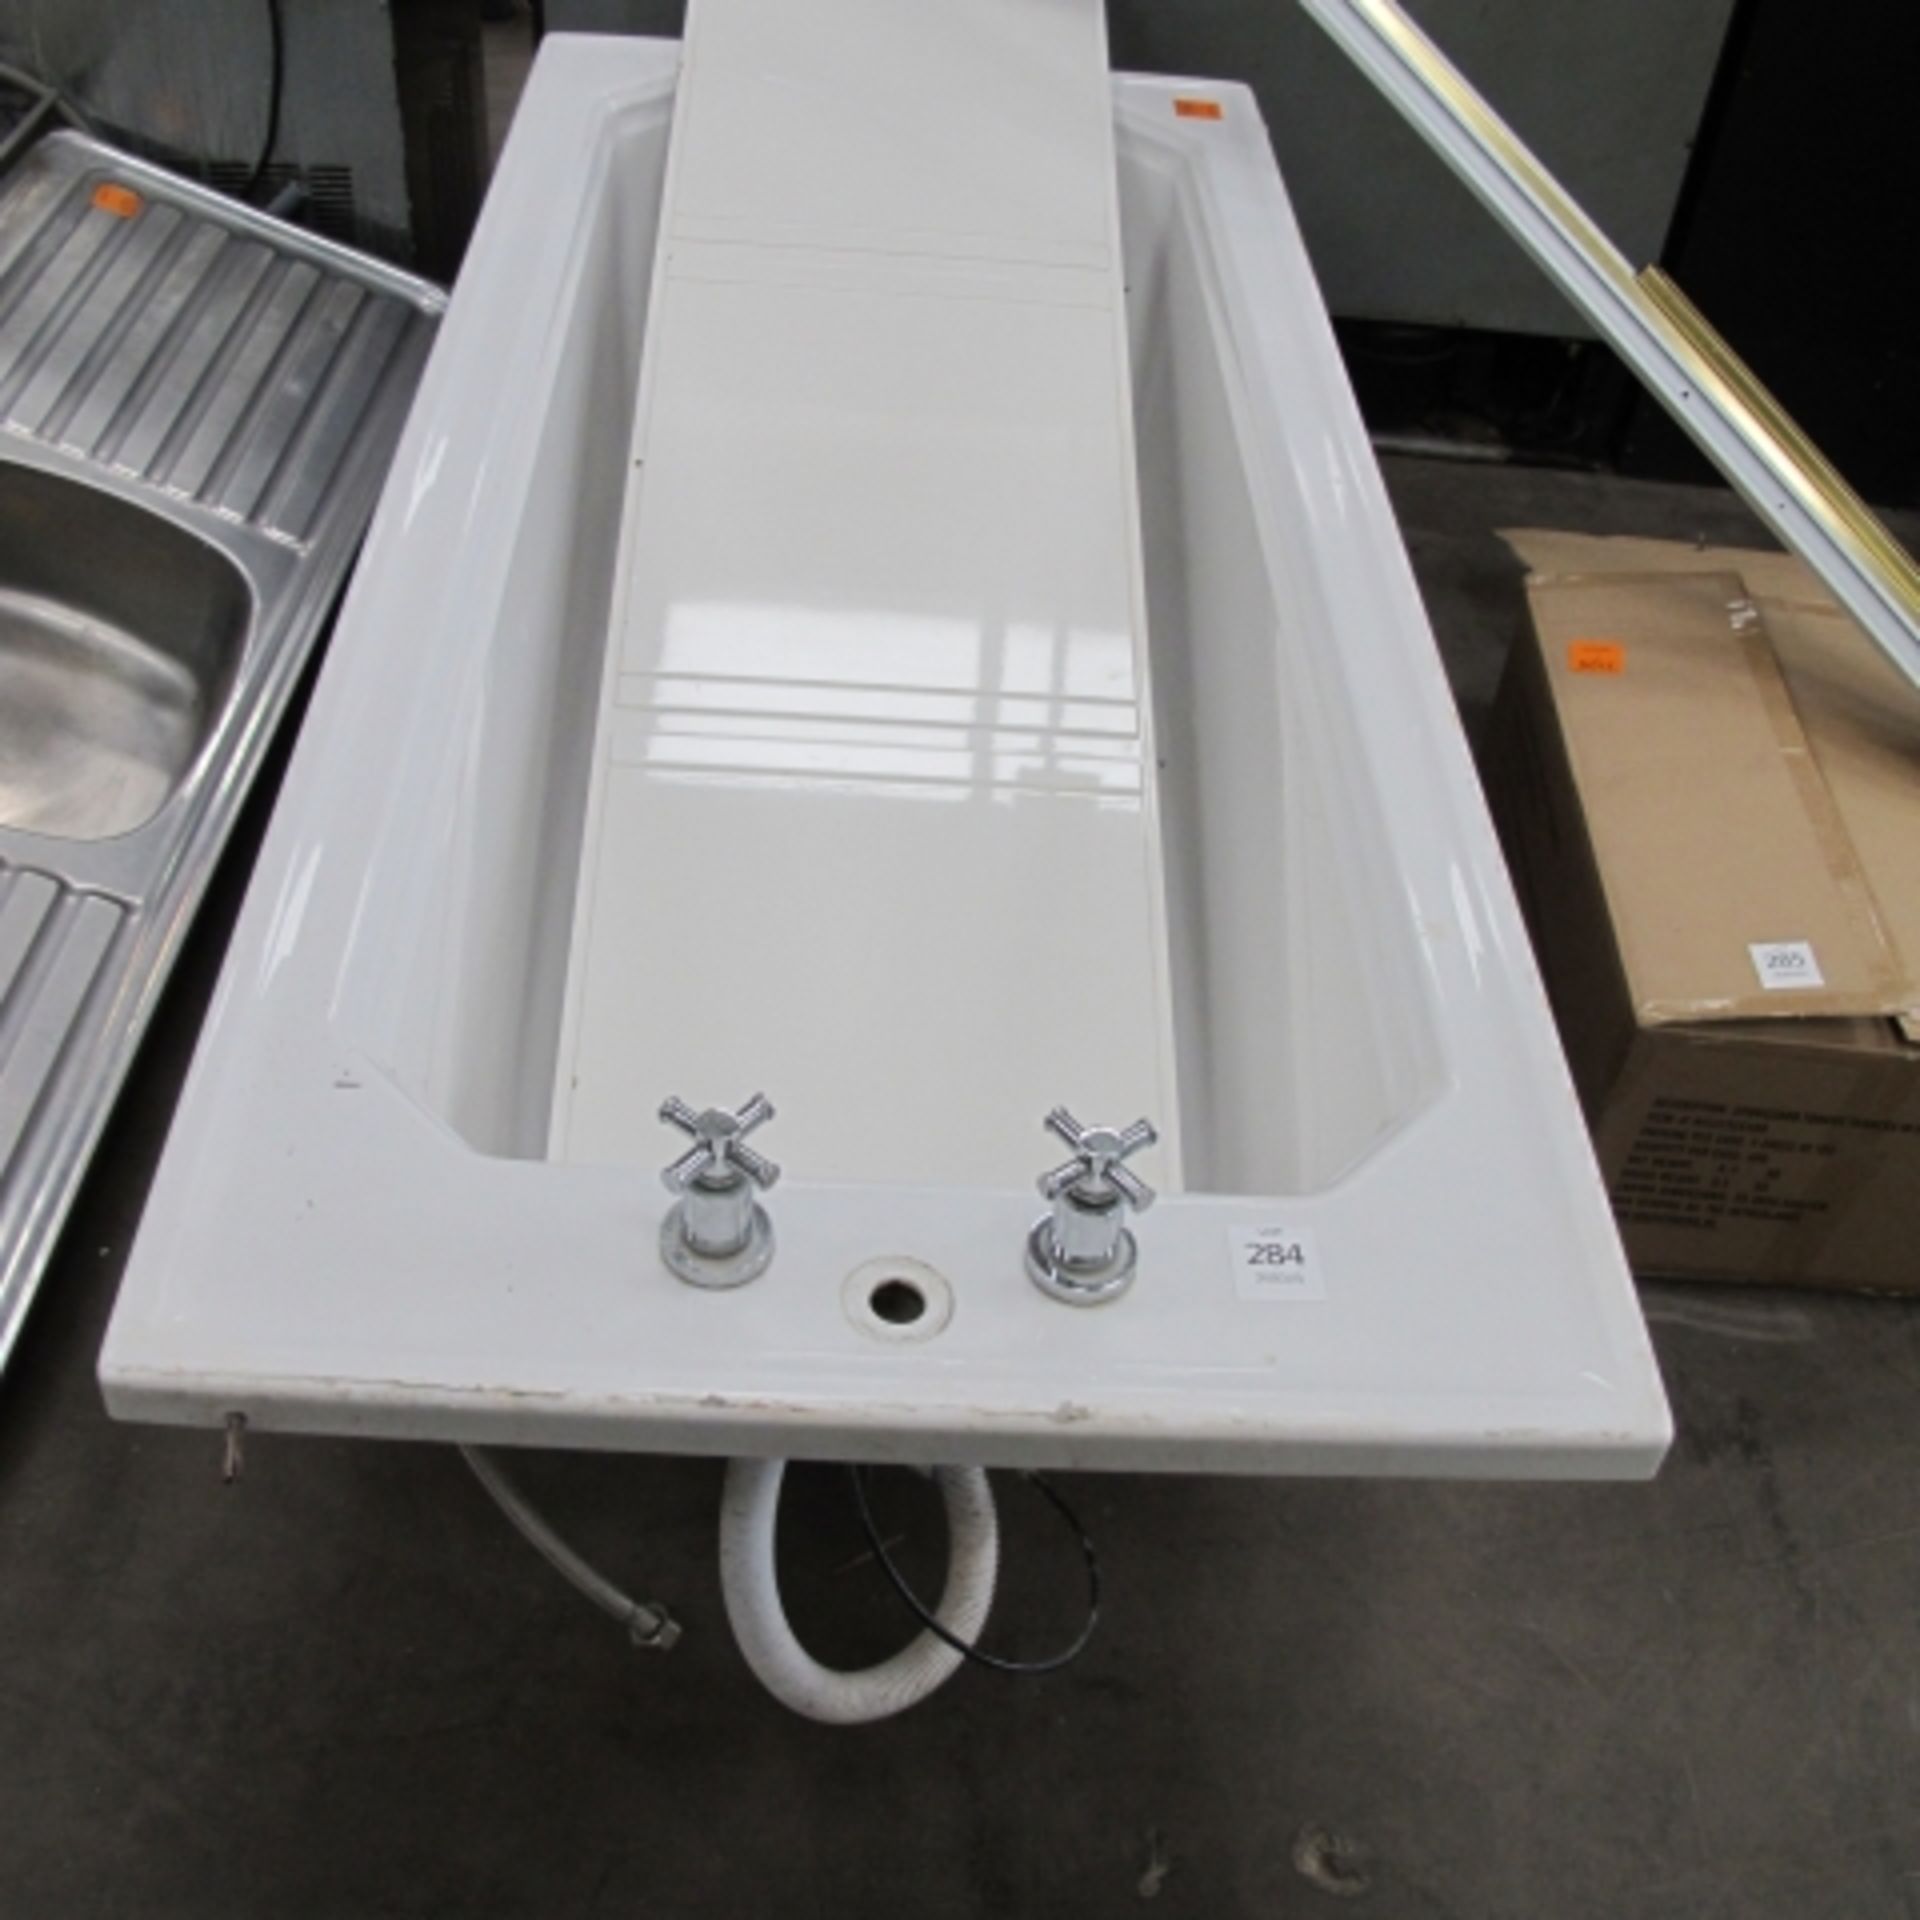 * 1 x White bath c/w taps & side panel. Please note, there is a £5 plus vat handling fee on this